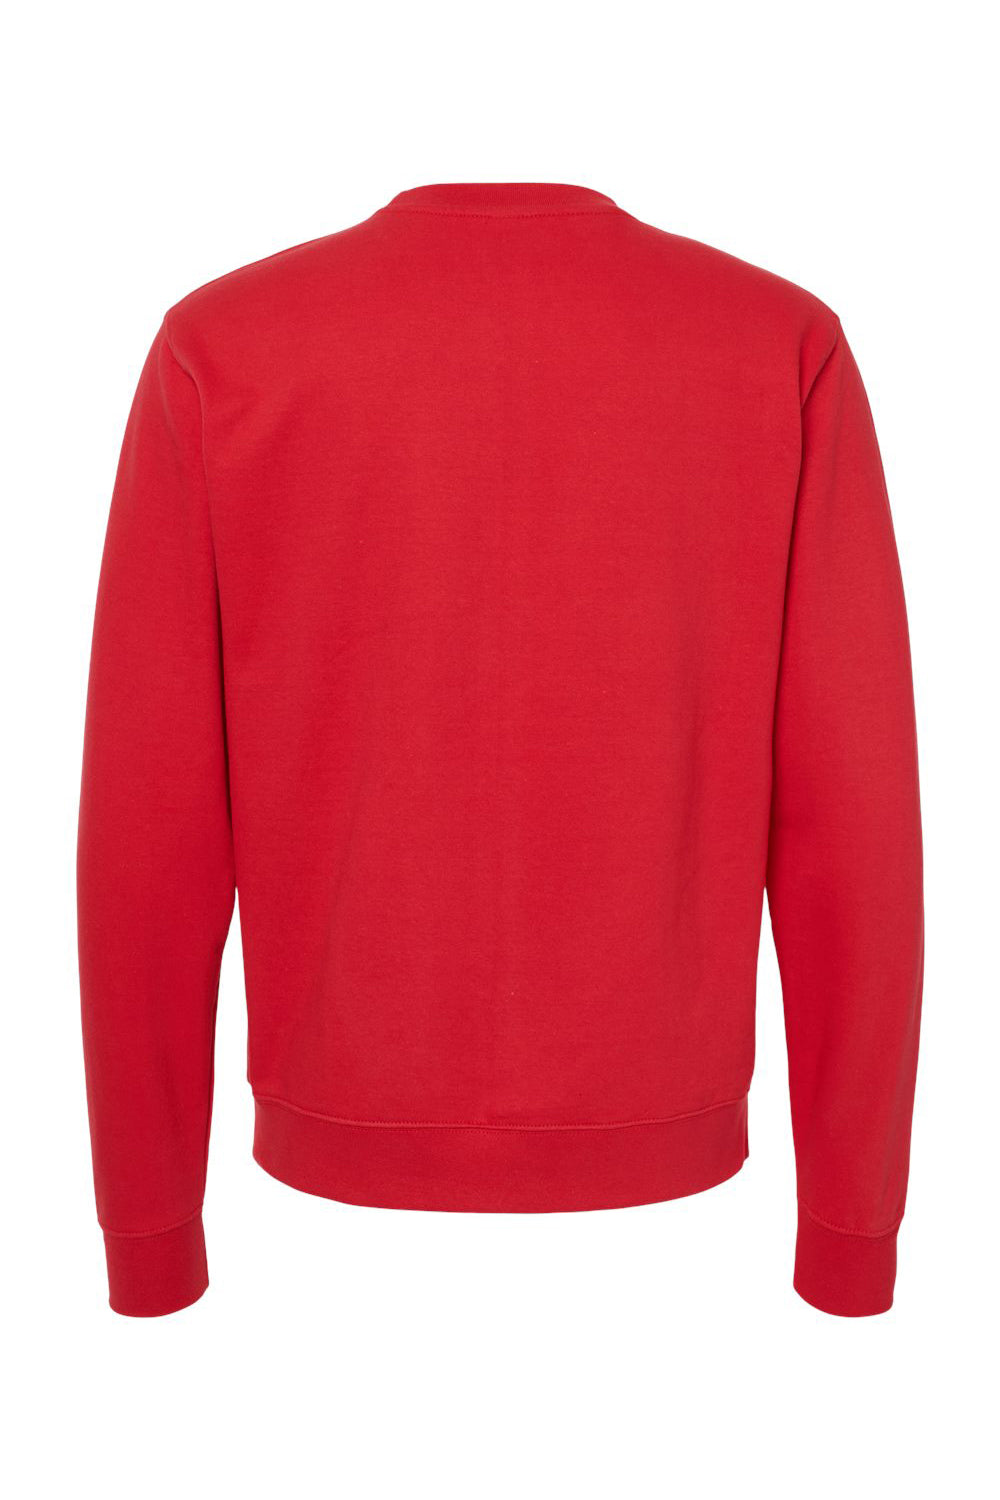 Independent Trading Co. SS3000 Mens Crewneck Sweatshirt Red Flat Back